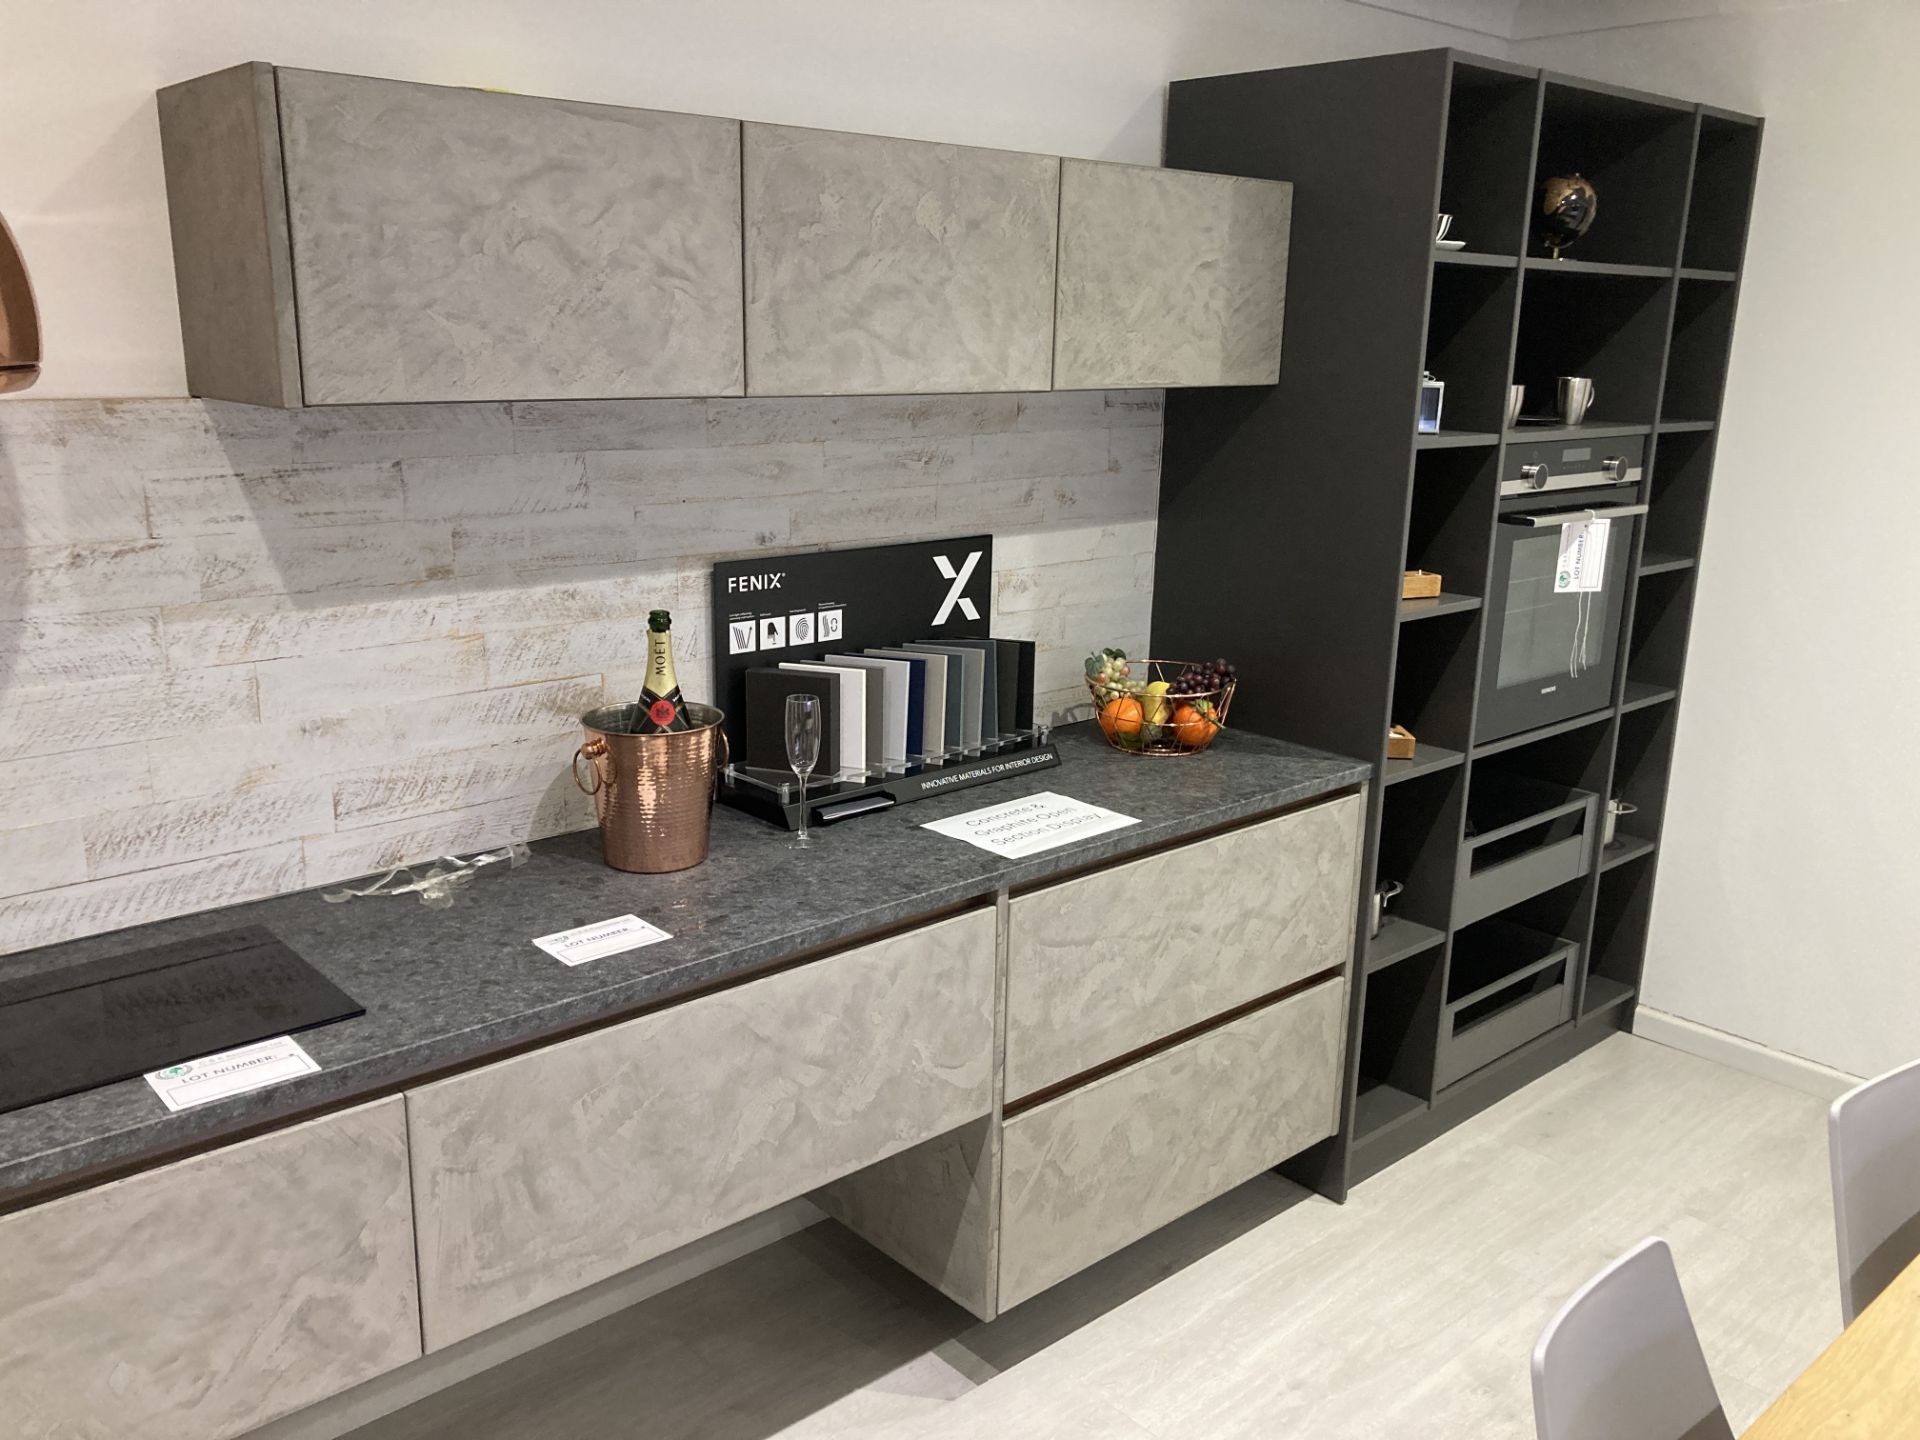 Concrete and graphite open section kitchen display with appliances - Image 2 of 11